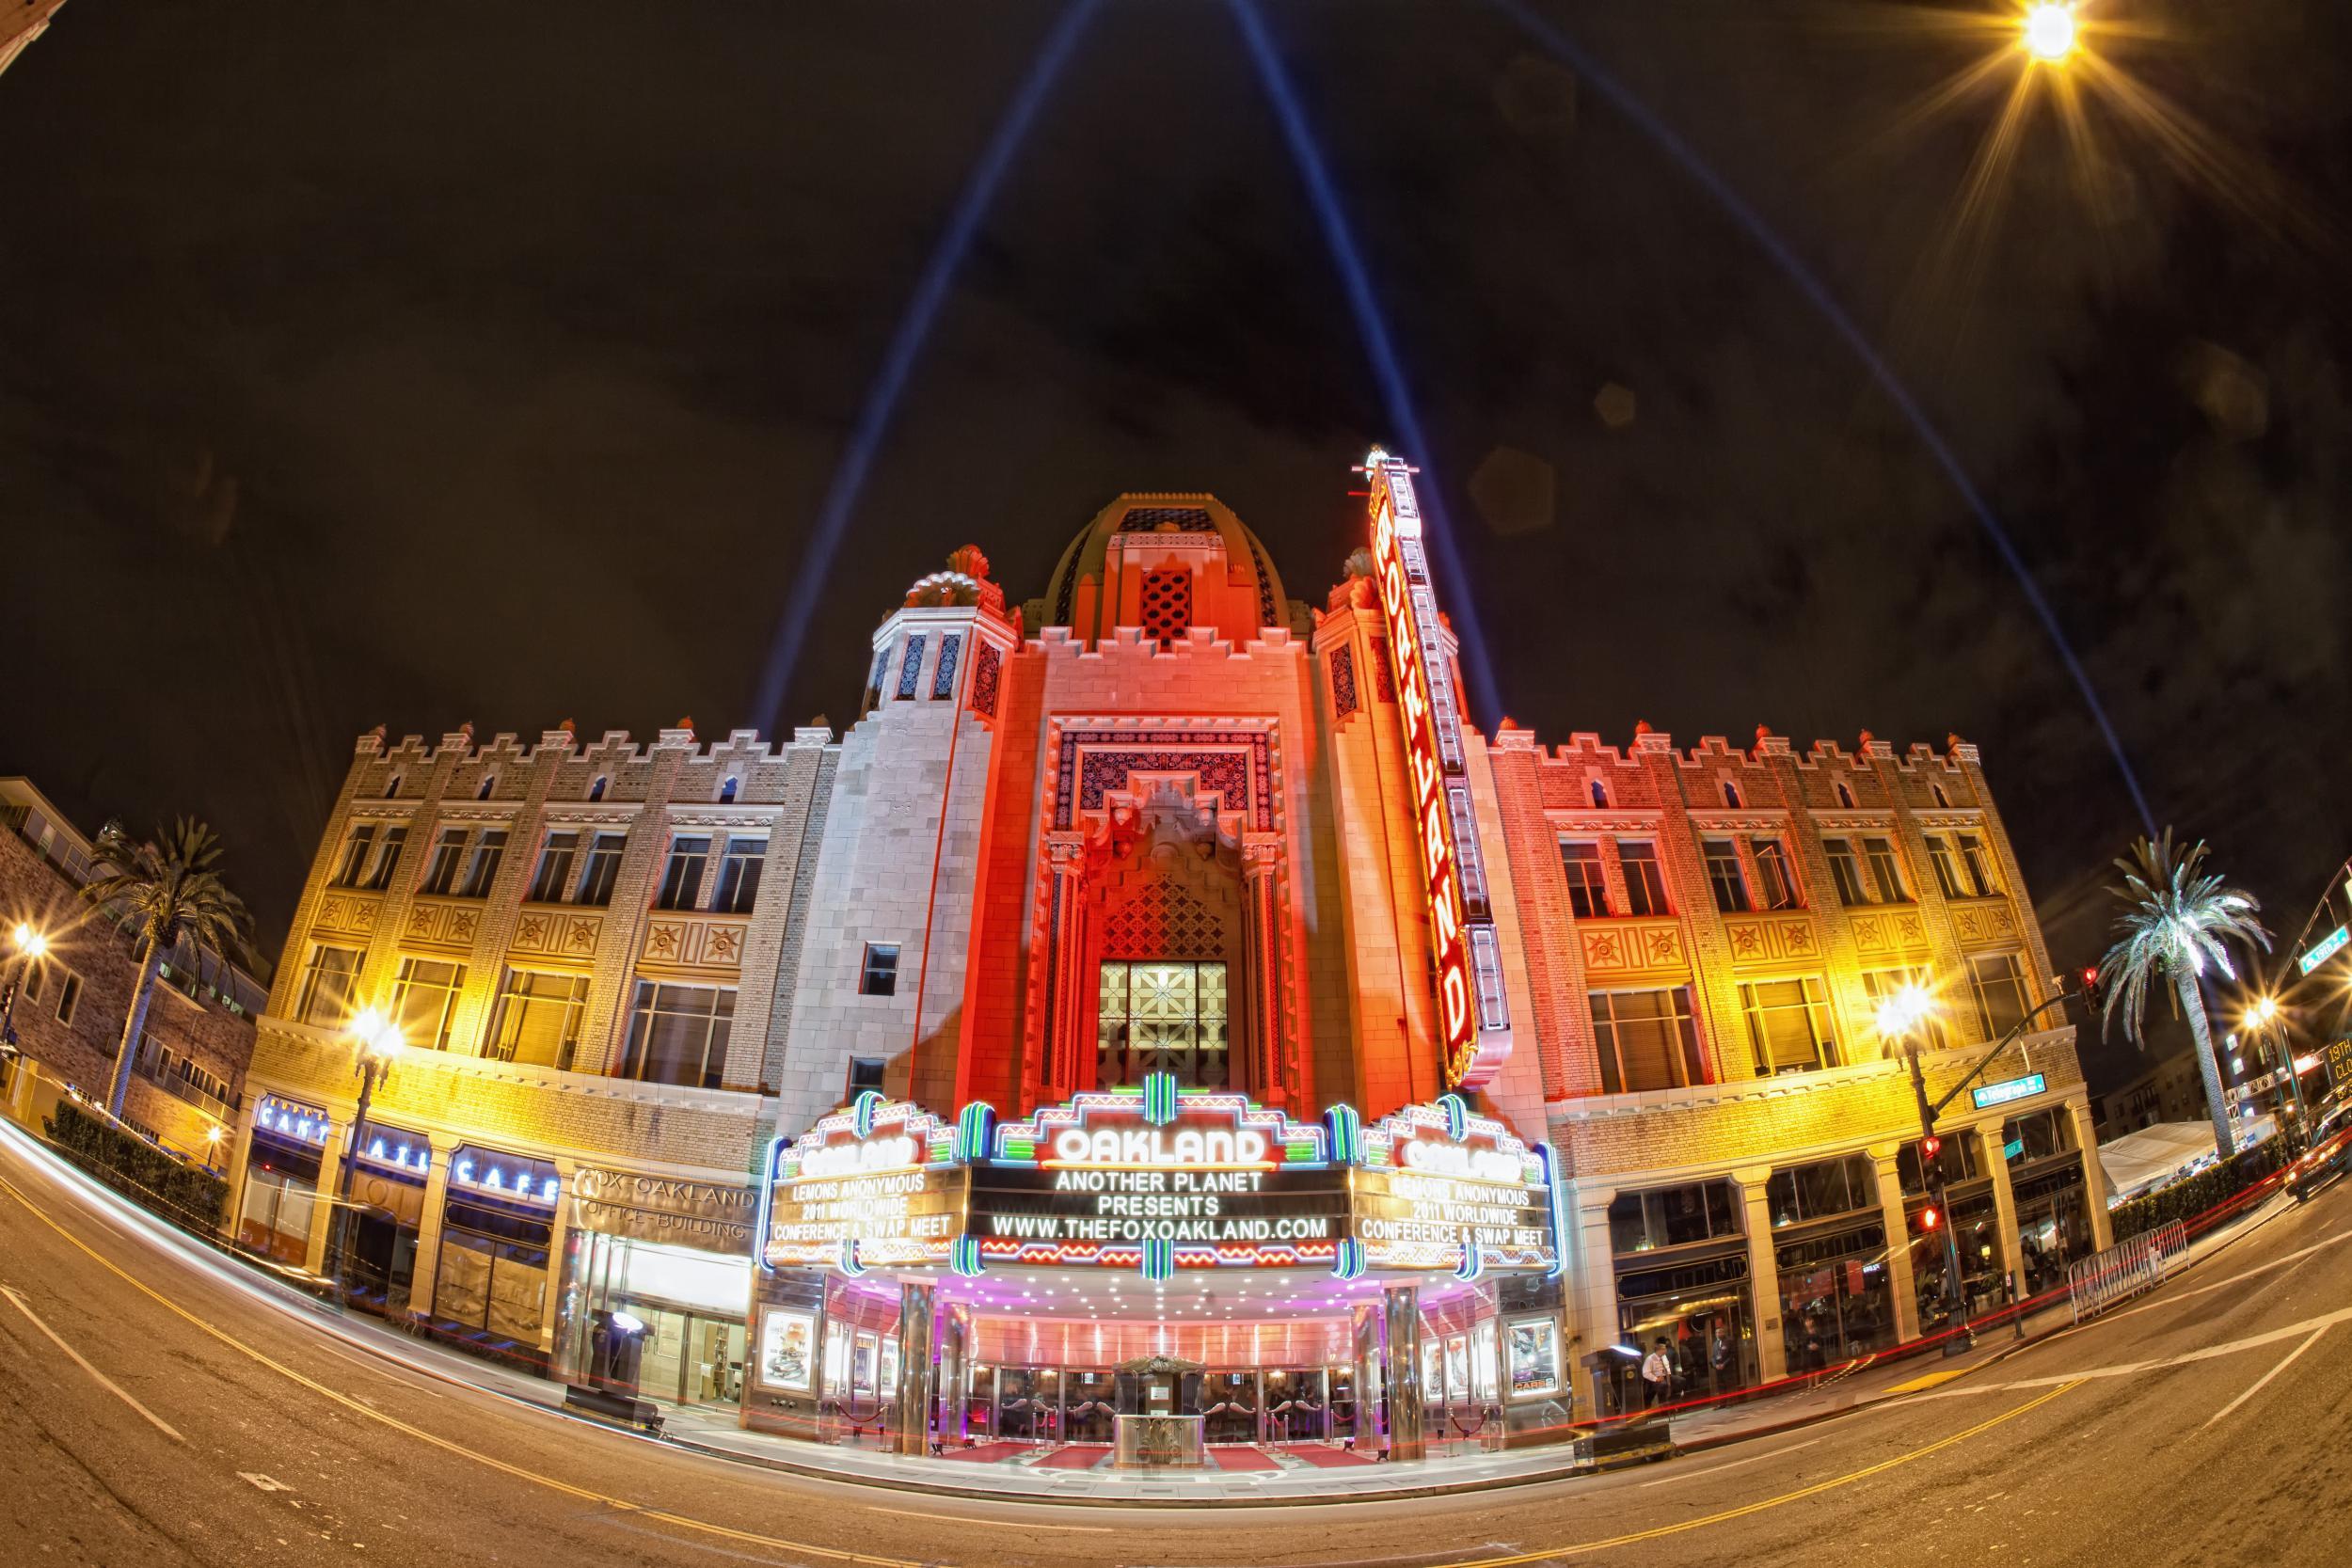 Uptown Oakland's lavish Fox Theatre has hosted some of the world's biggest bands